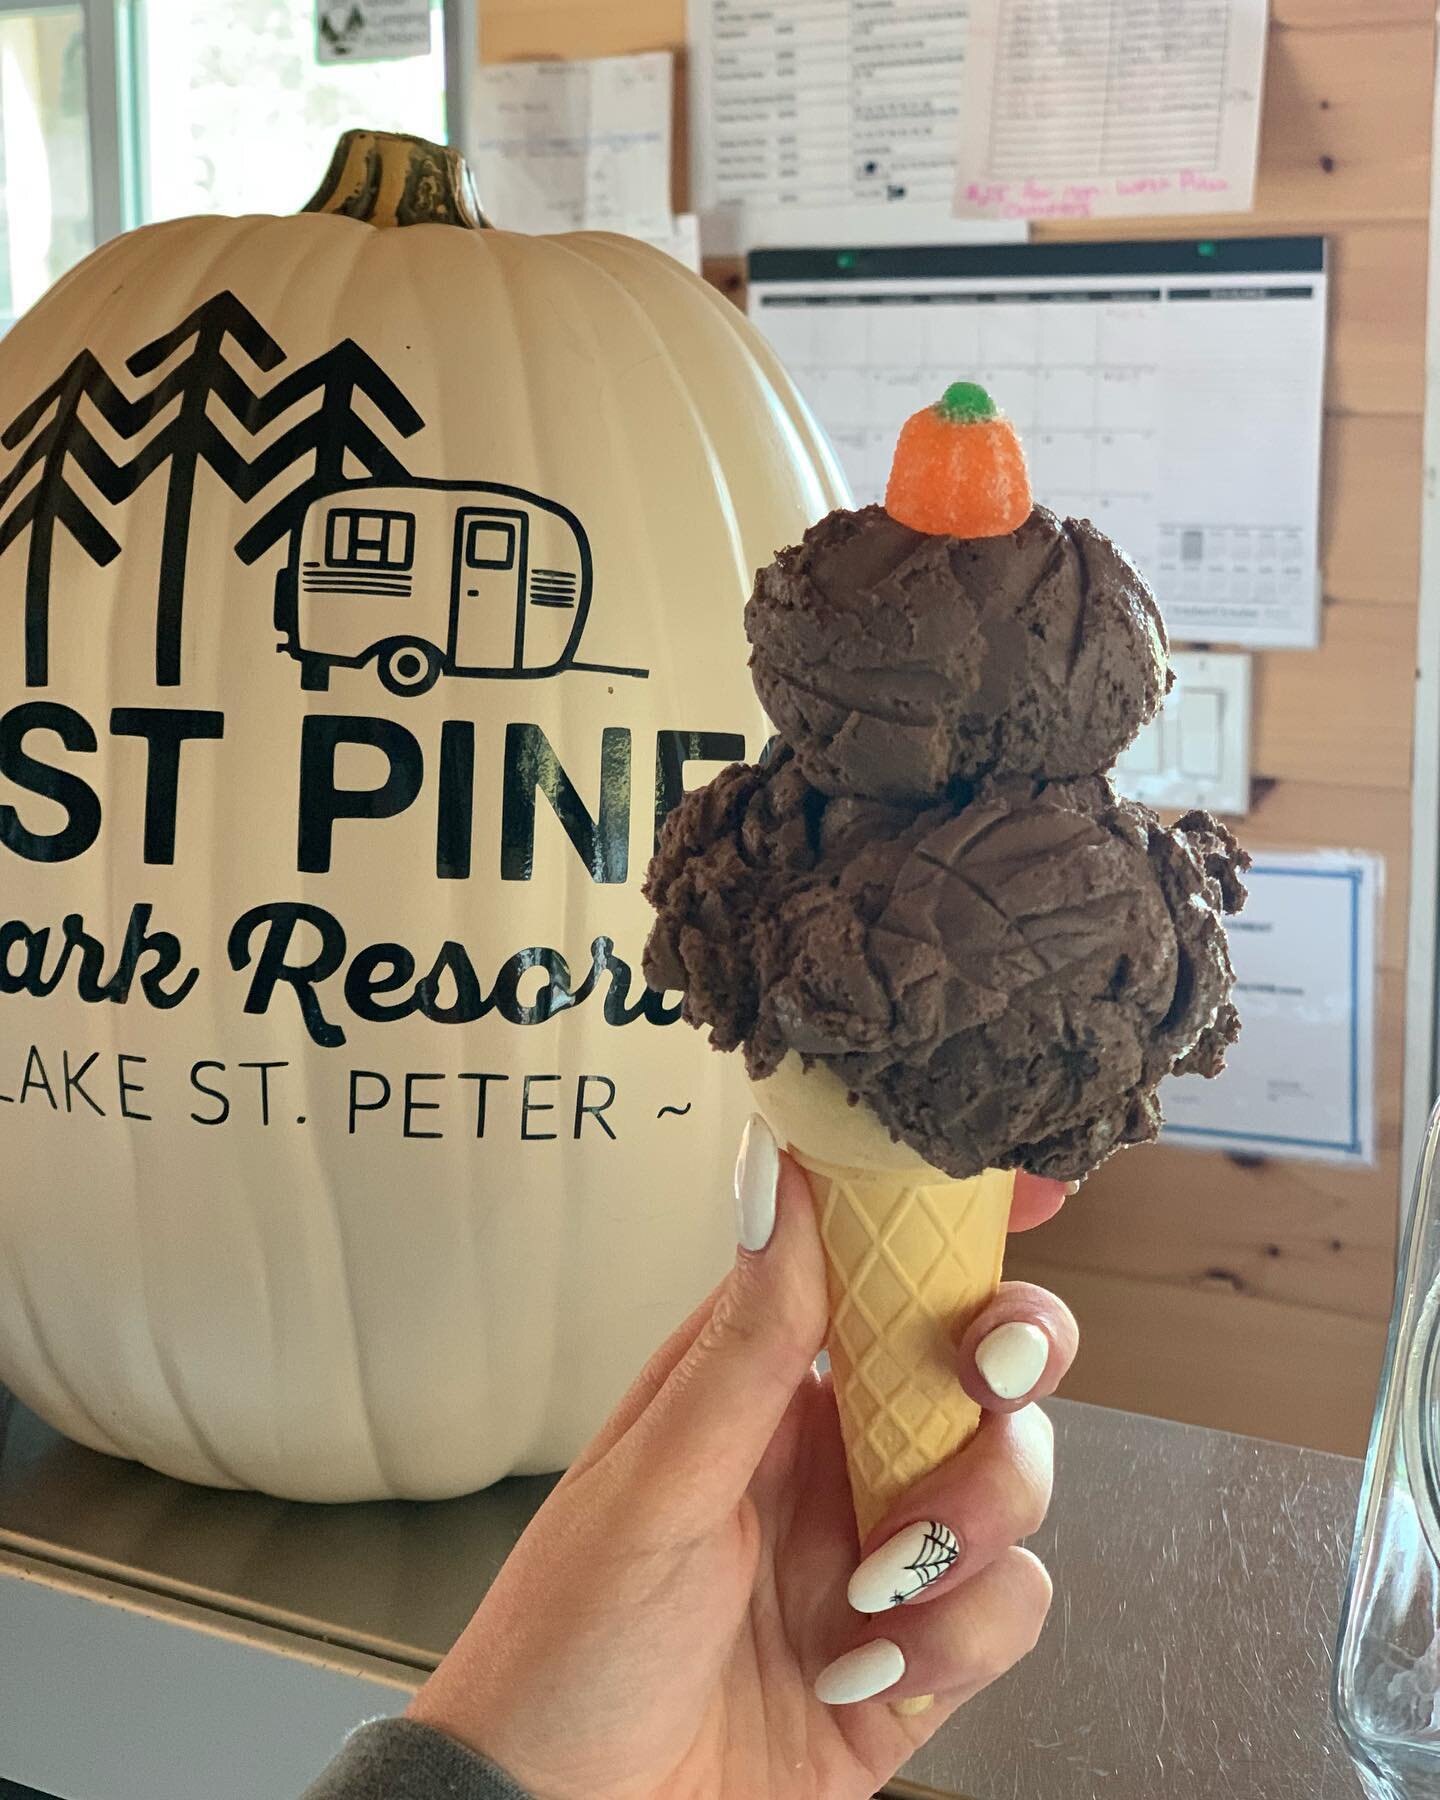 🍁HAPPY THANKSGIVING WEEKEND!! 🍂It&rsquo;s our last weekend open until 2023!! Grab a scoop before it&rsquo;s too late! 

We&rsquo;re open 12-5 today! 

#icecream #pumpkin #pumpkinpie #chocolateicecream #thanksgiving #thanksgivingweekend #fall #westp